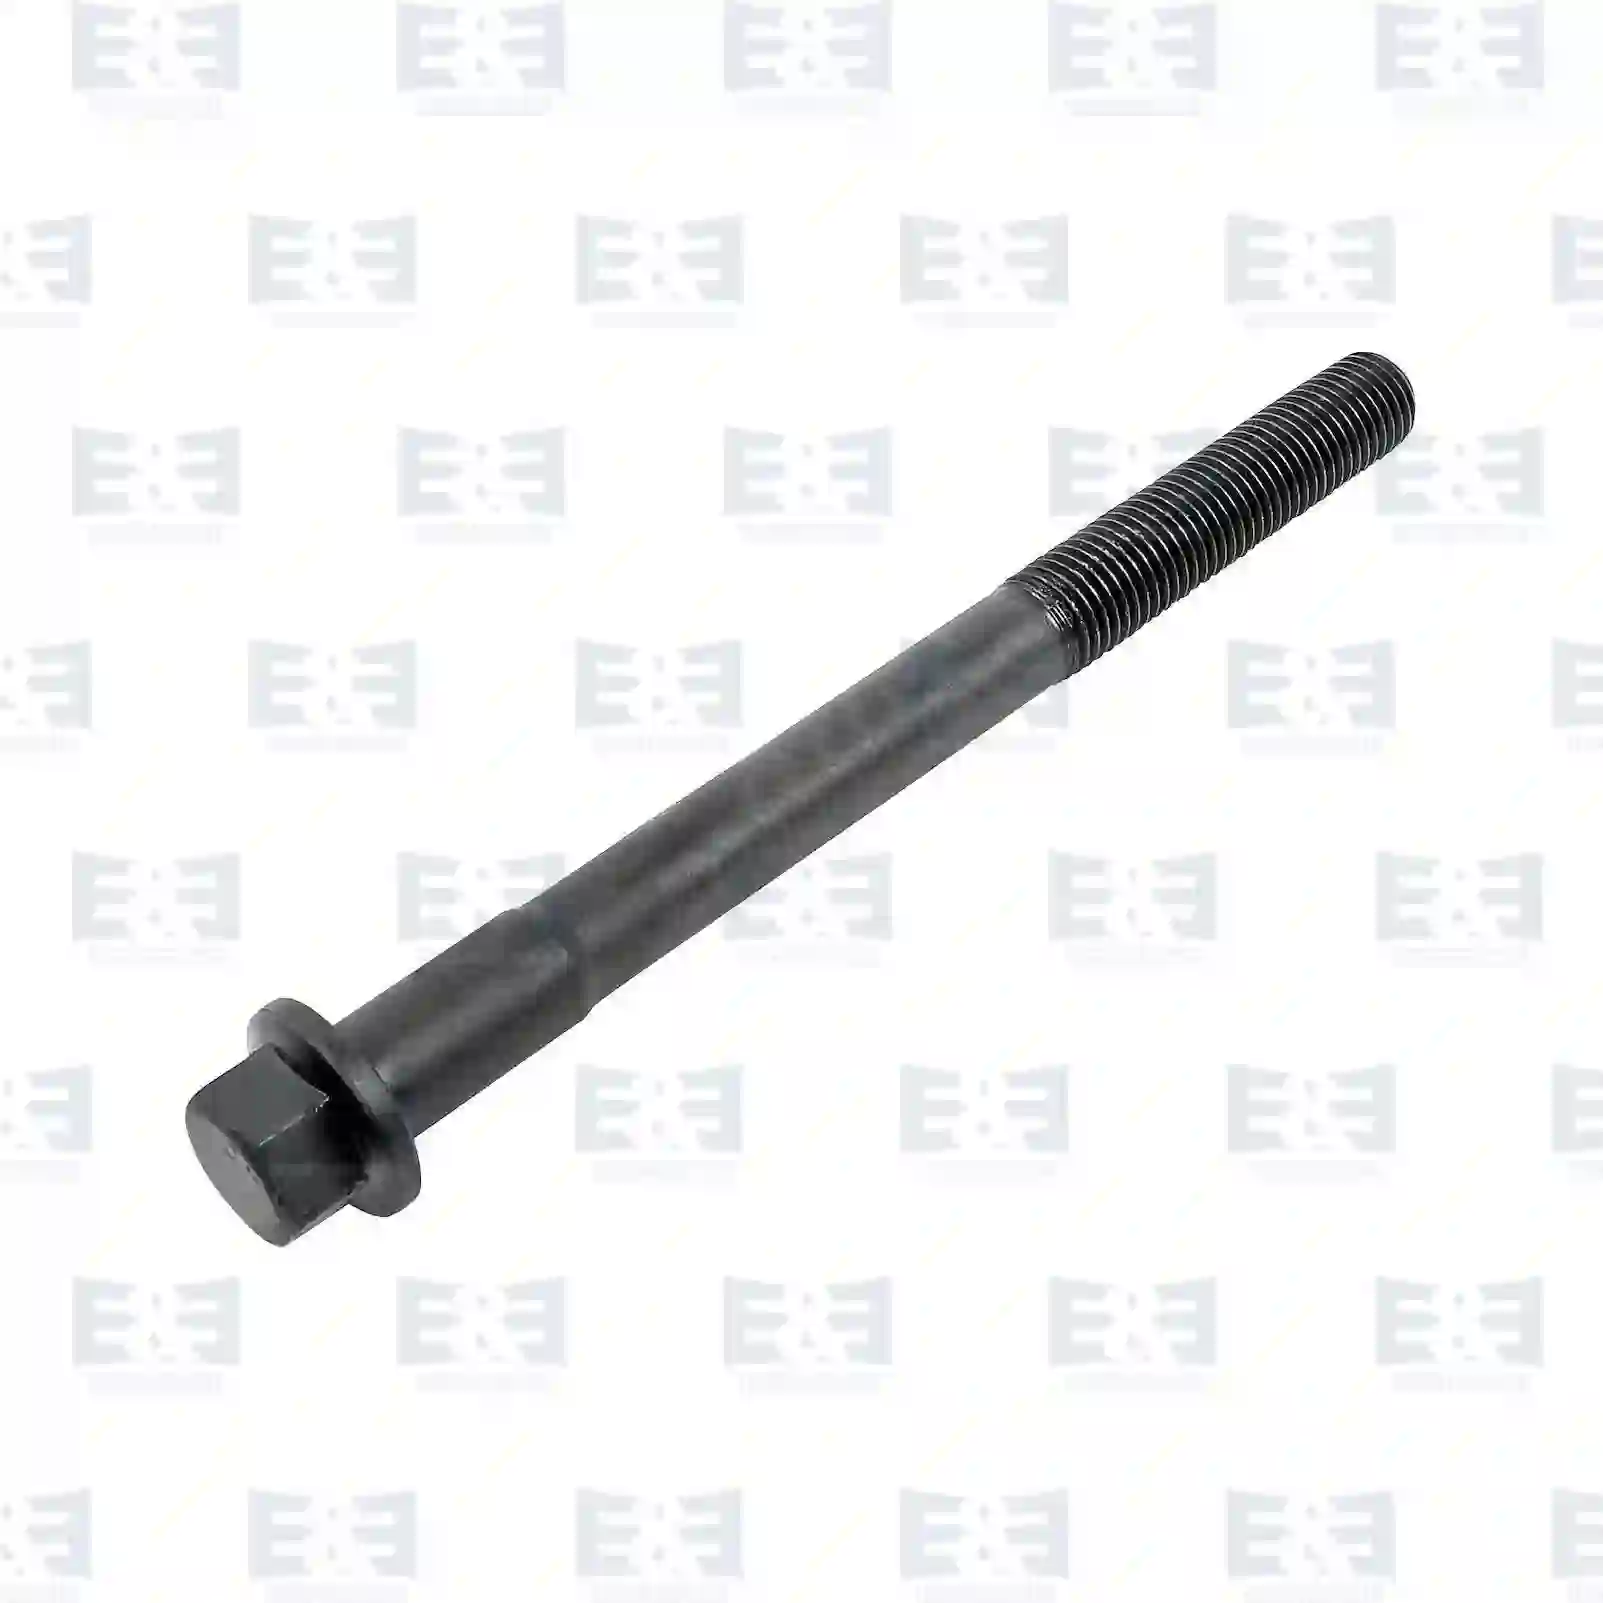  Cylinder Head Cylinder head screw, EE No 2E2206305 ,  oem no:1333786, 1451946, 1852442, 2212238, ZG01063-0008 E&E Truck Spare Parts | Truck Spare Parts, Auotomotive Spare Parts